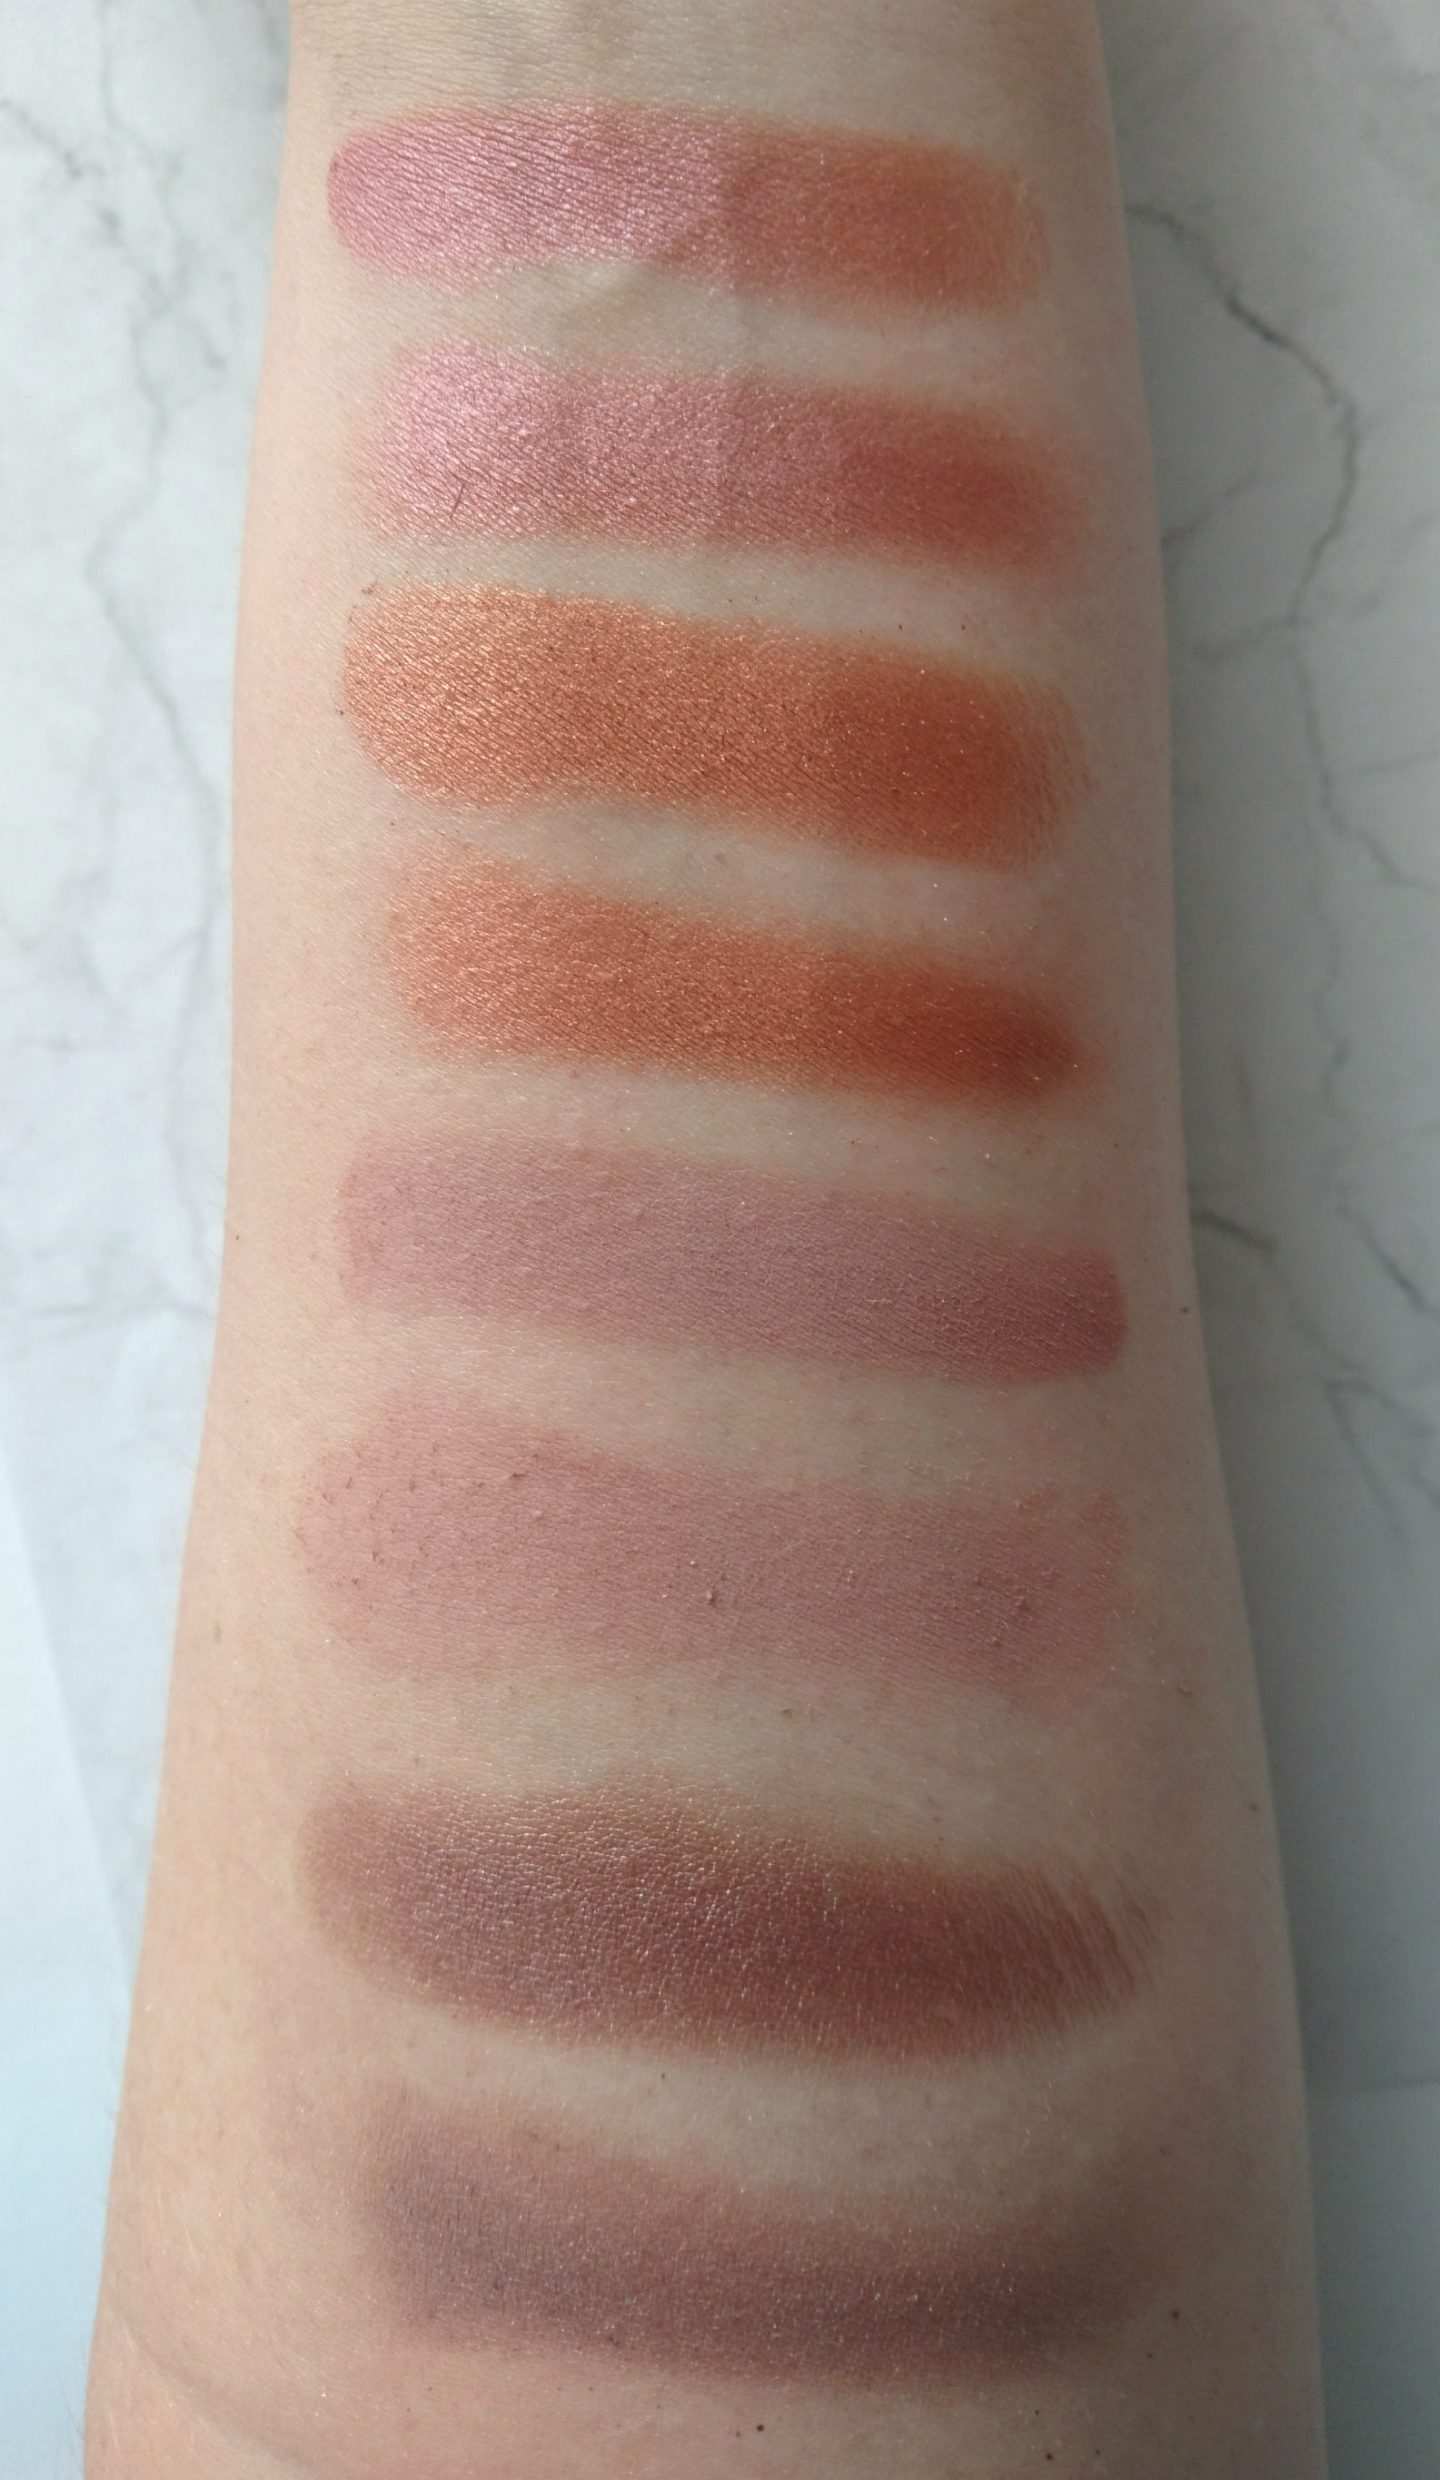 Lotique eyeshadow palette swatches